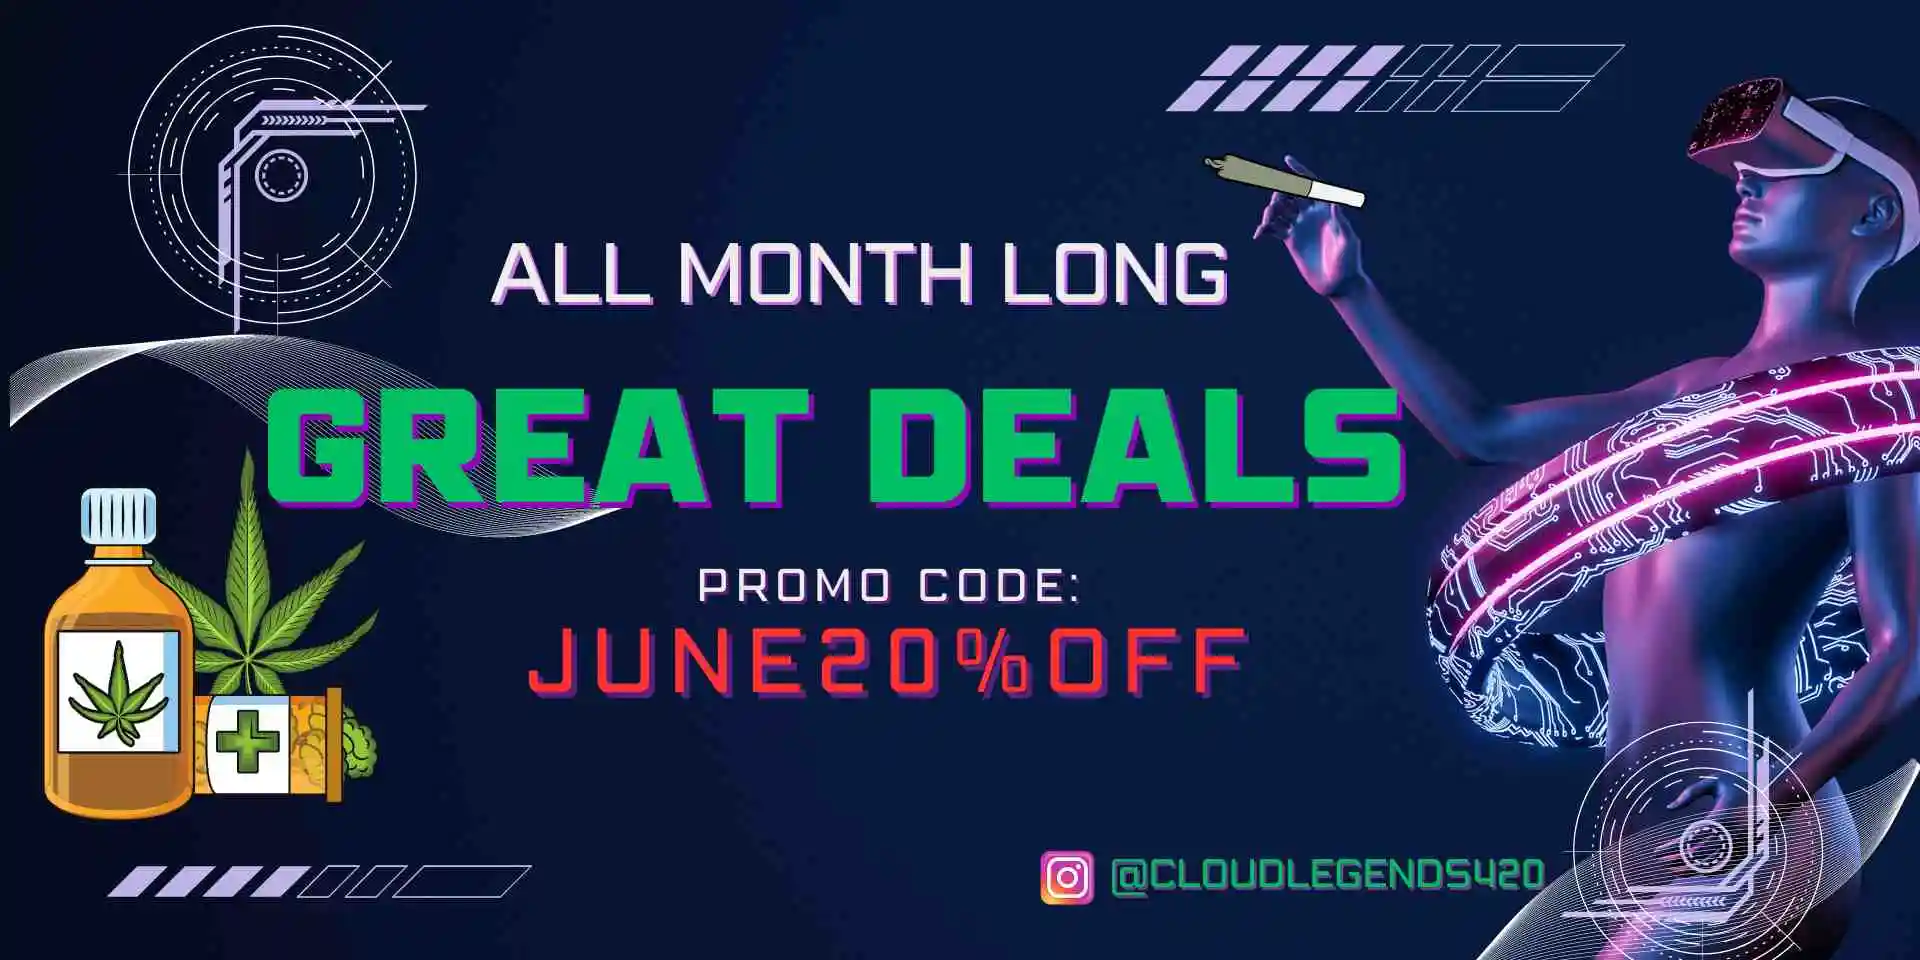 Futuristic Virtual Technology Sale Banner with Promo code from Cloud Legends 420